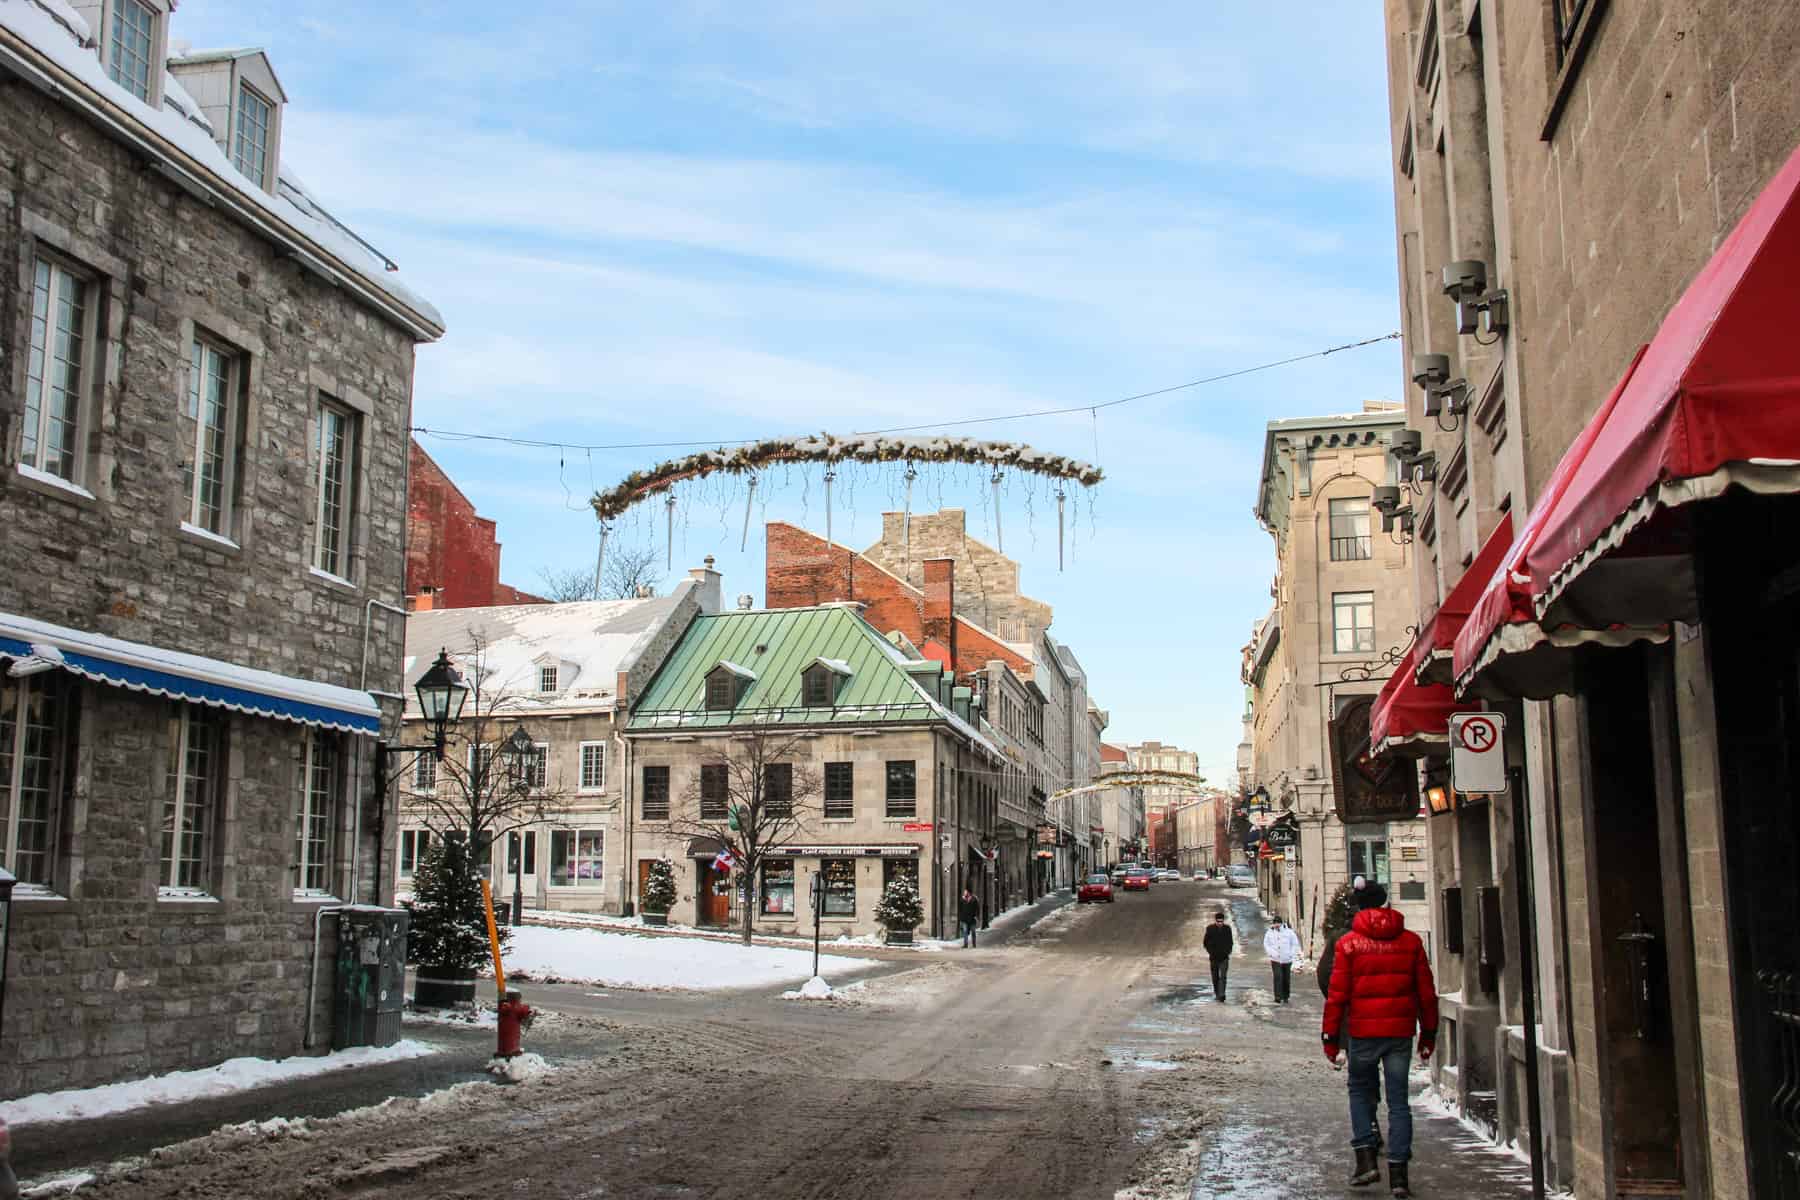 A person in a red jacket walks on the side of the street within a grid of golden brown stone buildings in Old Montreal in winter. Christmas decorations hang overhead. 